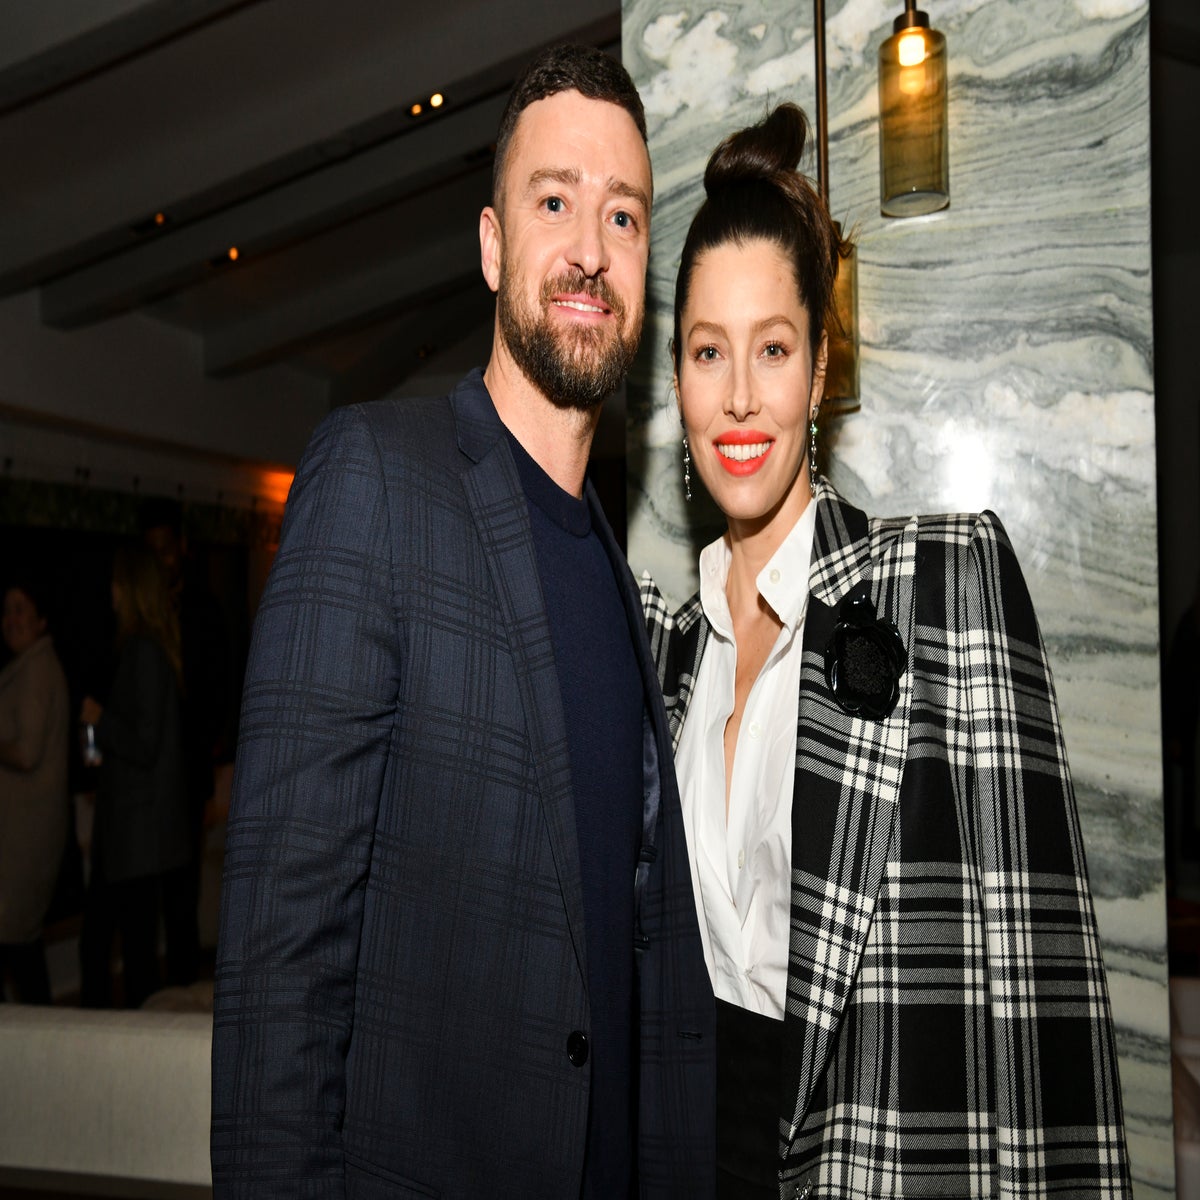 Jessica Biel says she relearned parenting with second son Phineas